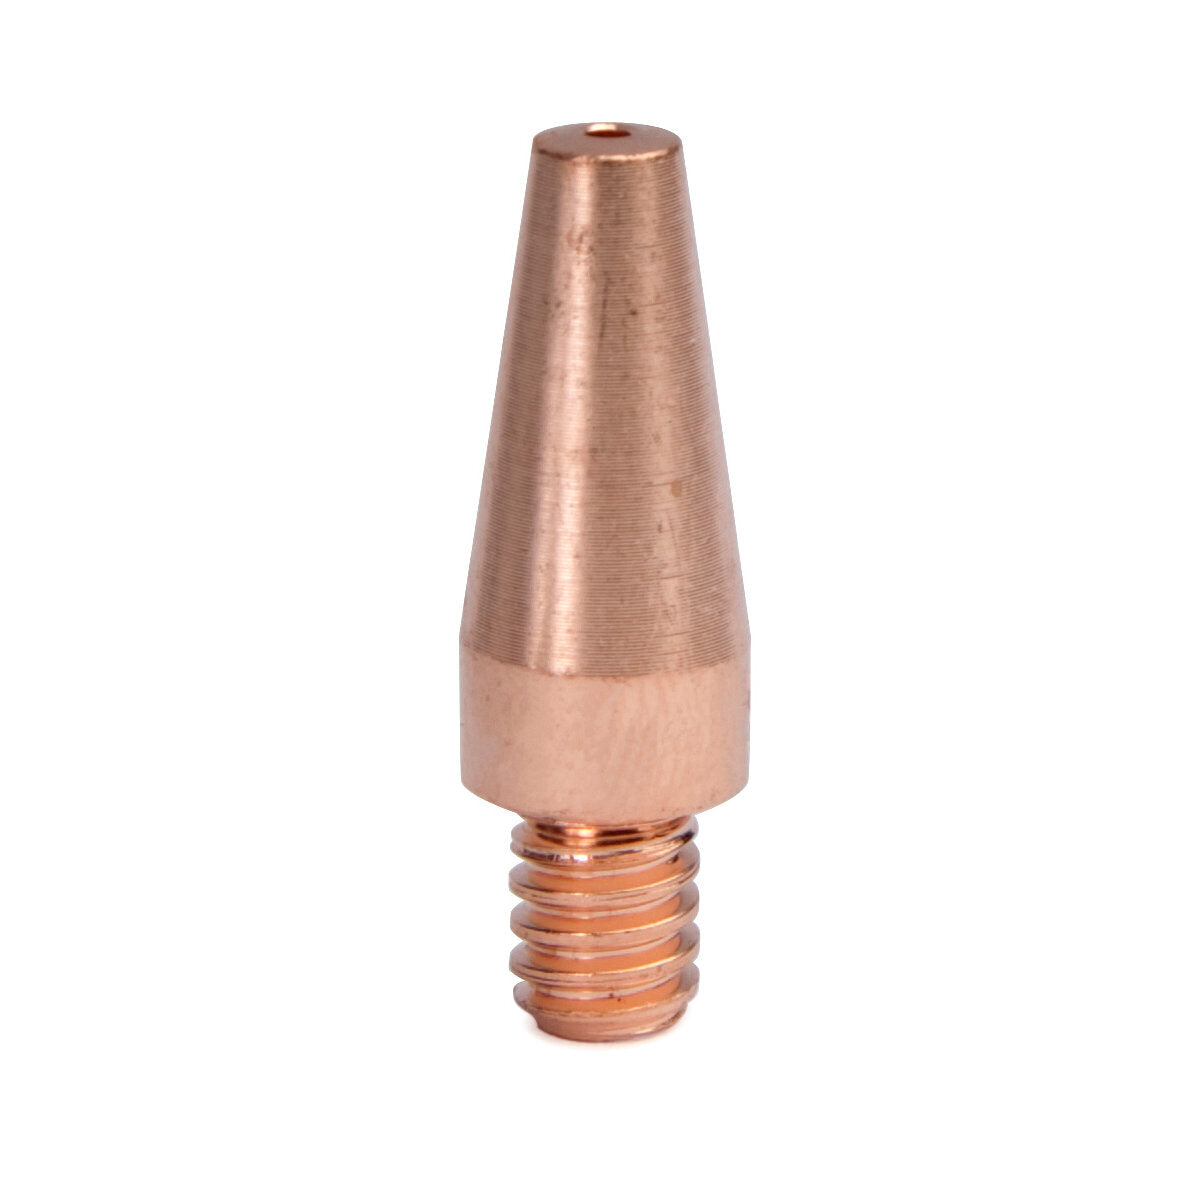 Lincoln Electric - Copper Plus® Contact Tip - 350A, Tapered, 0.035 in (10/pack) - KP2744-035T